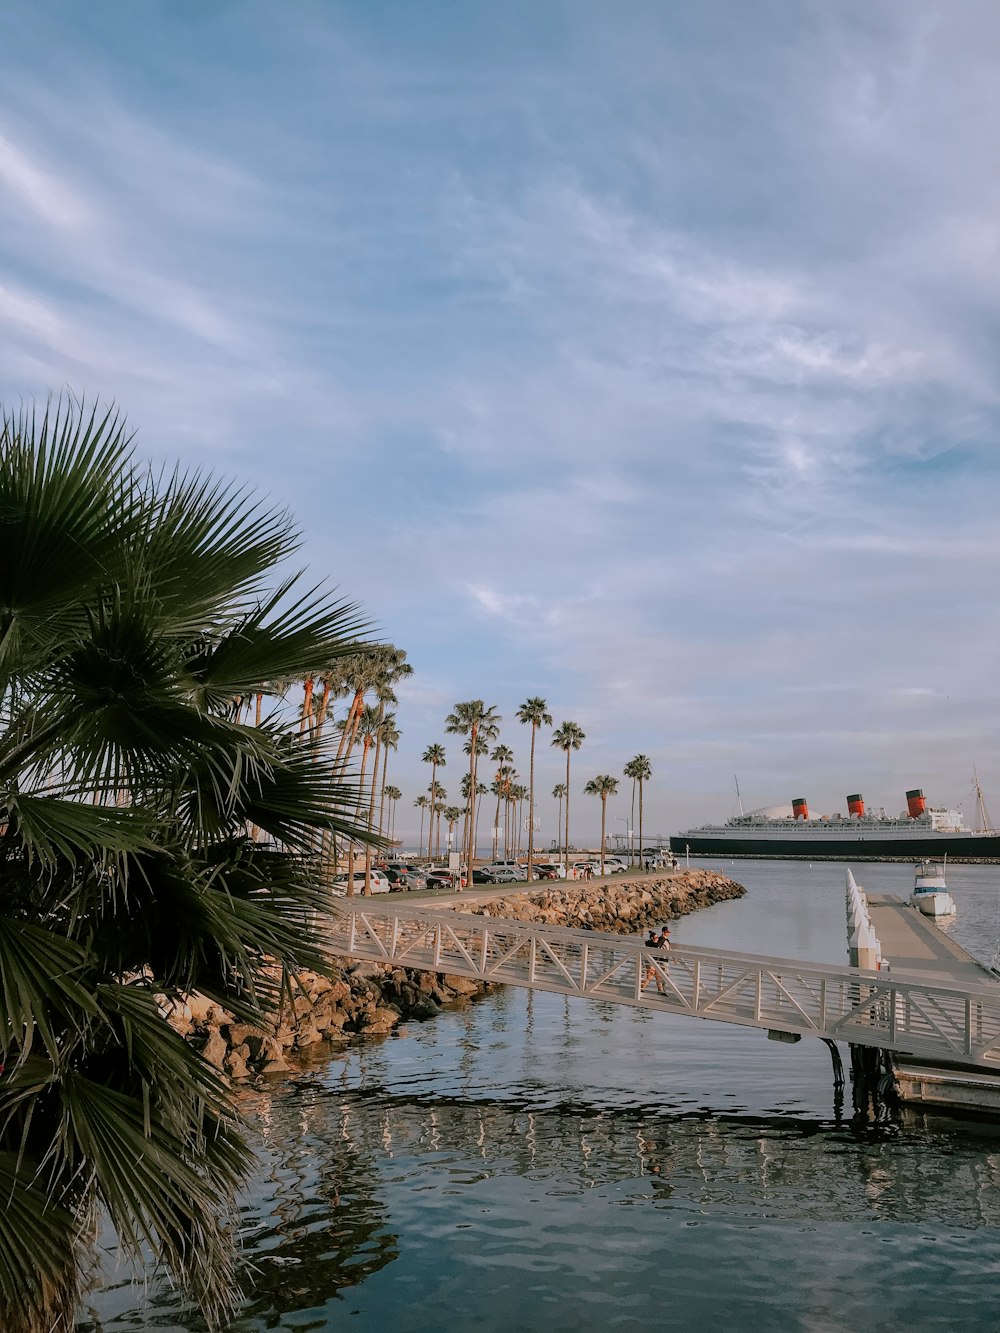 palm trees near body of water during daytime